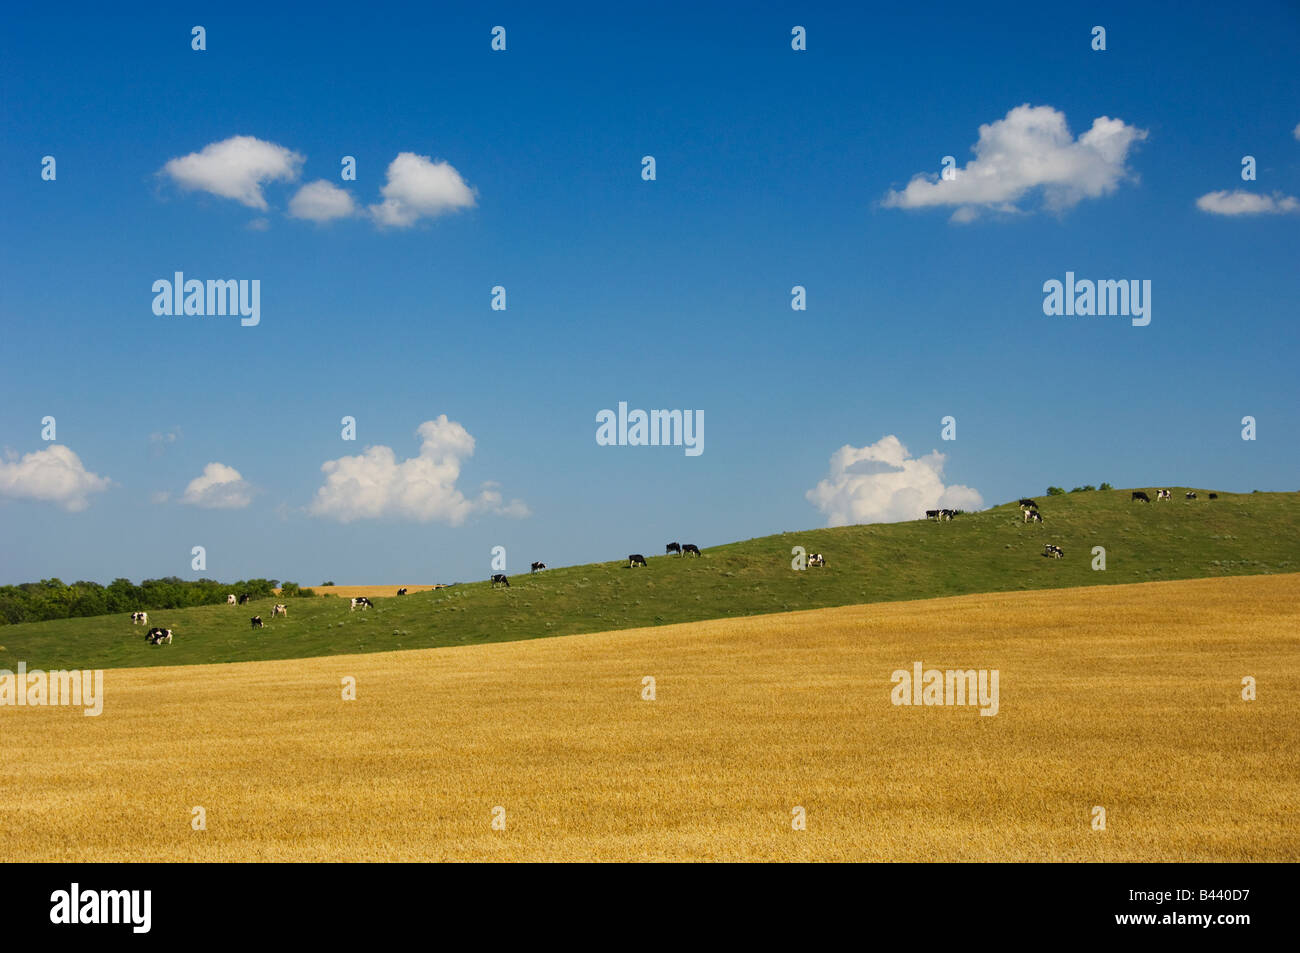 A field of ripe wheat with cows grazing on a hillside near Holland Manitoba Canada Stock Photo